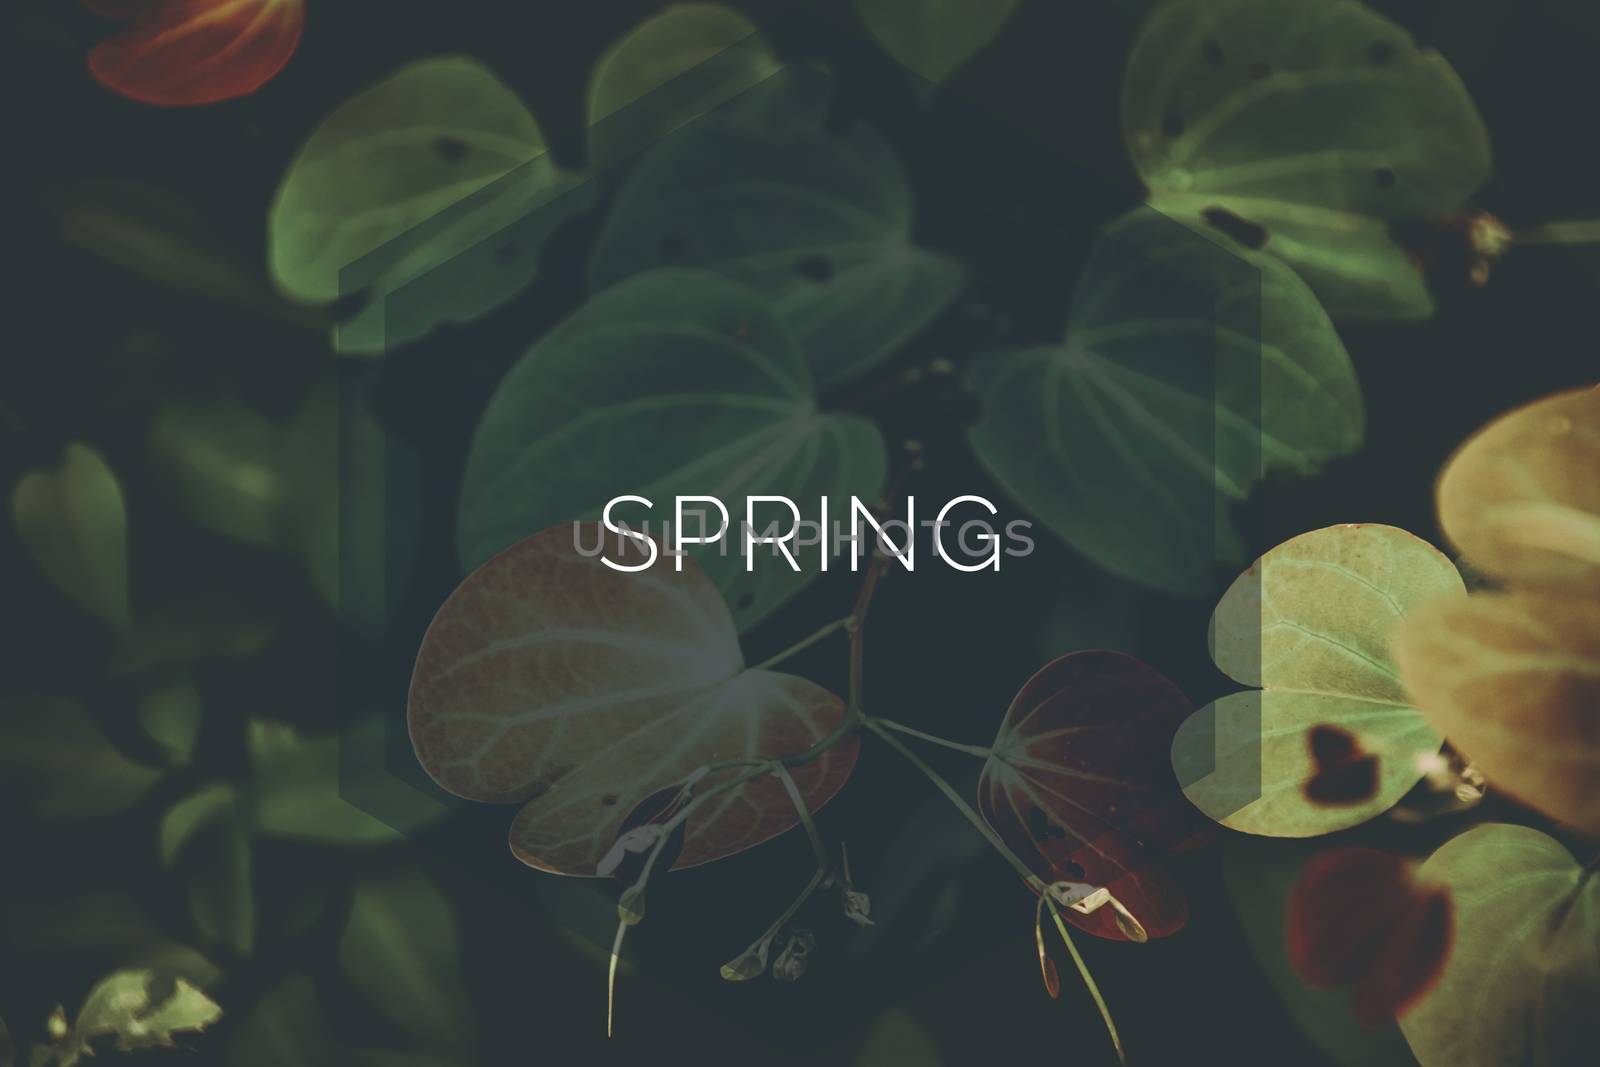 Spring themed typography background by Sonnet15